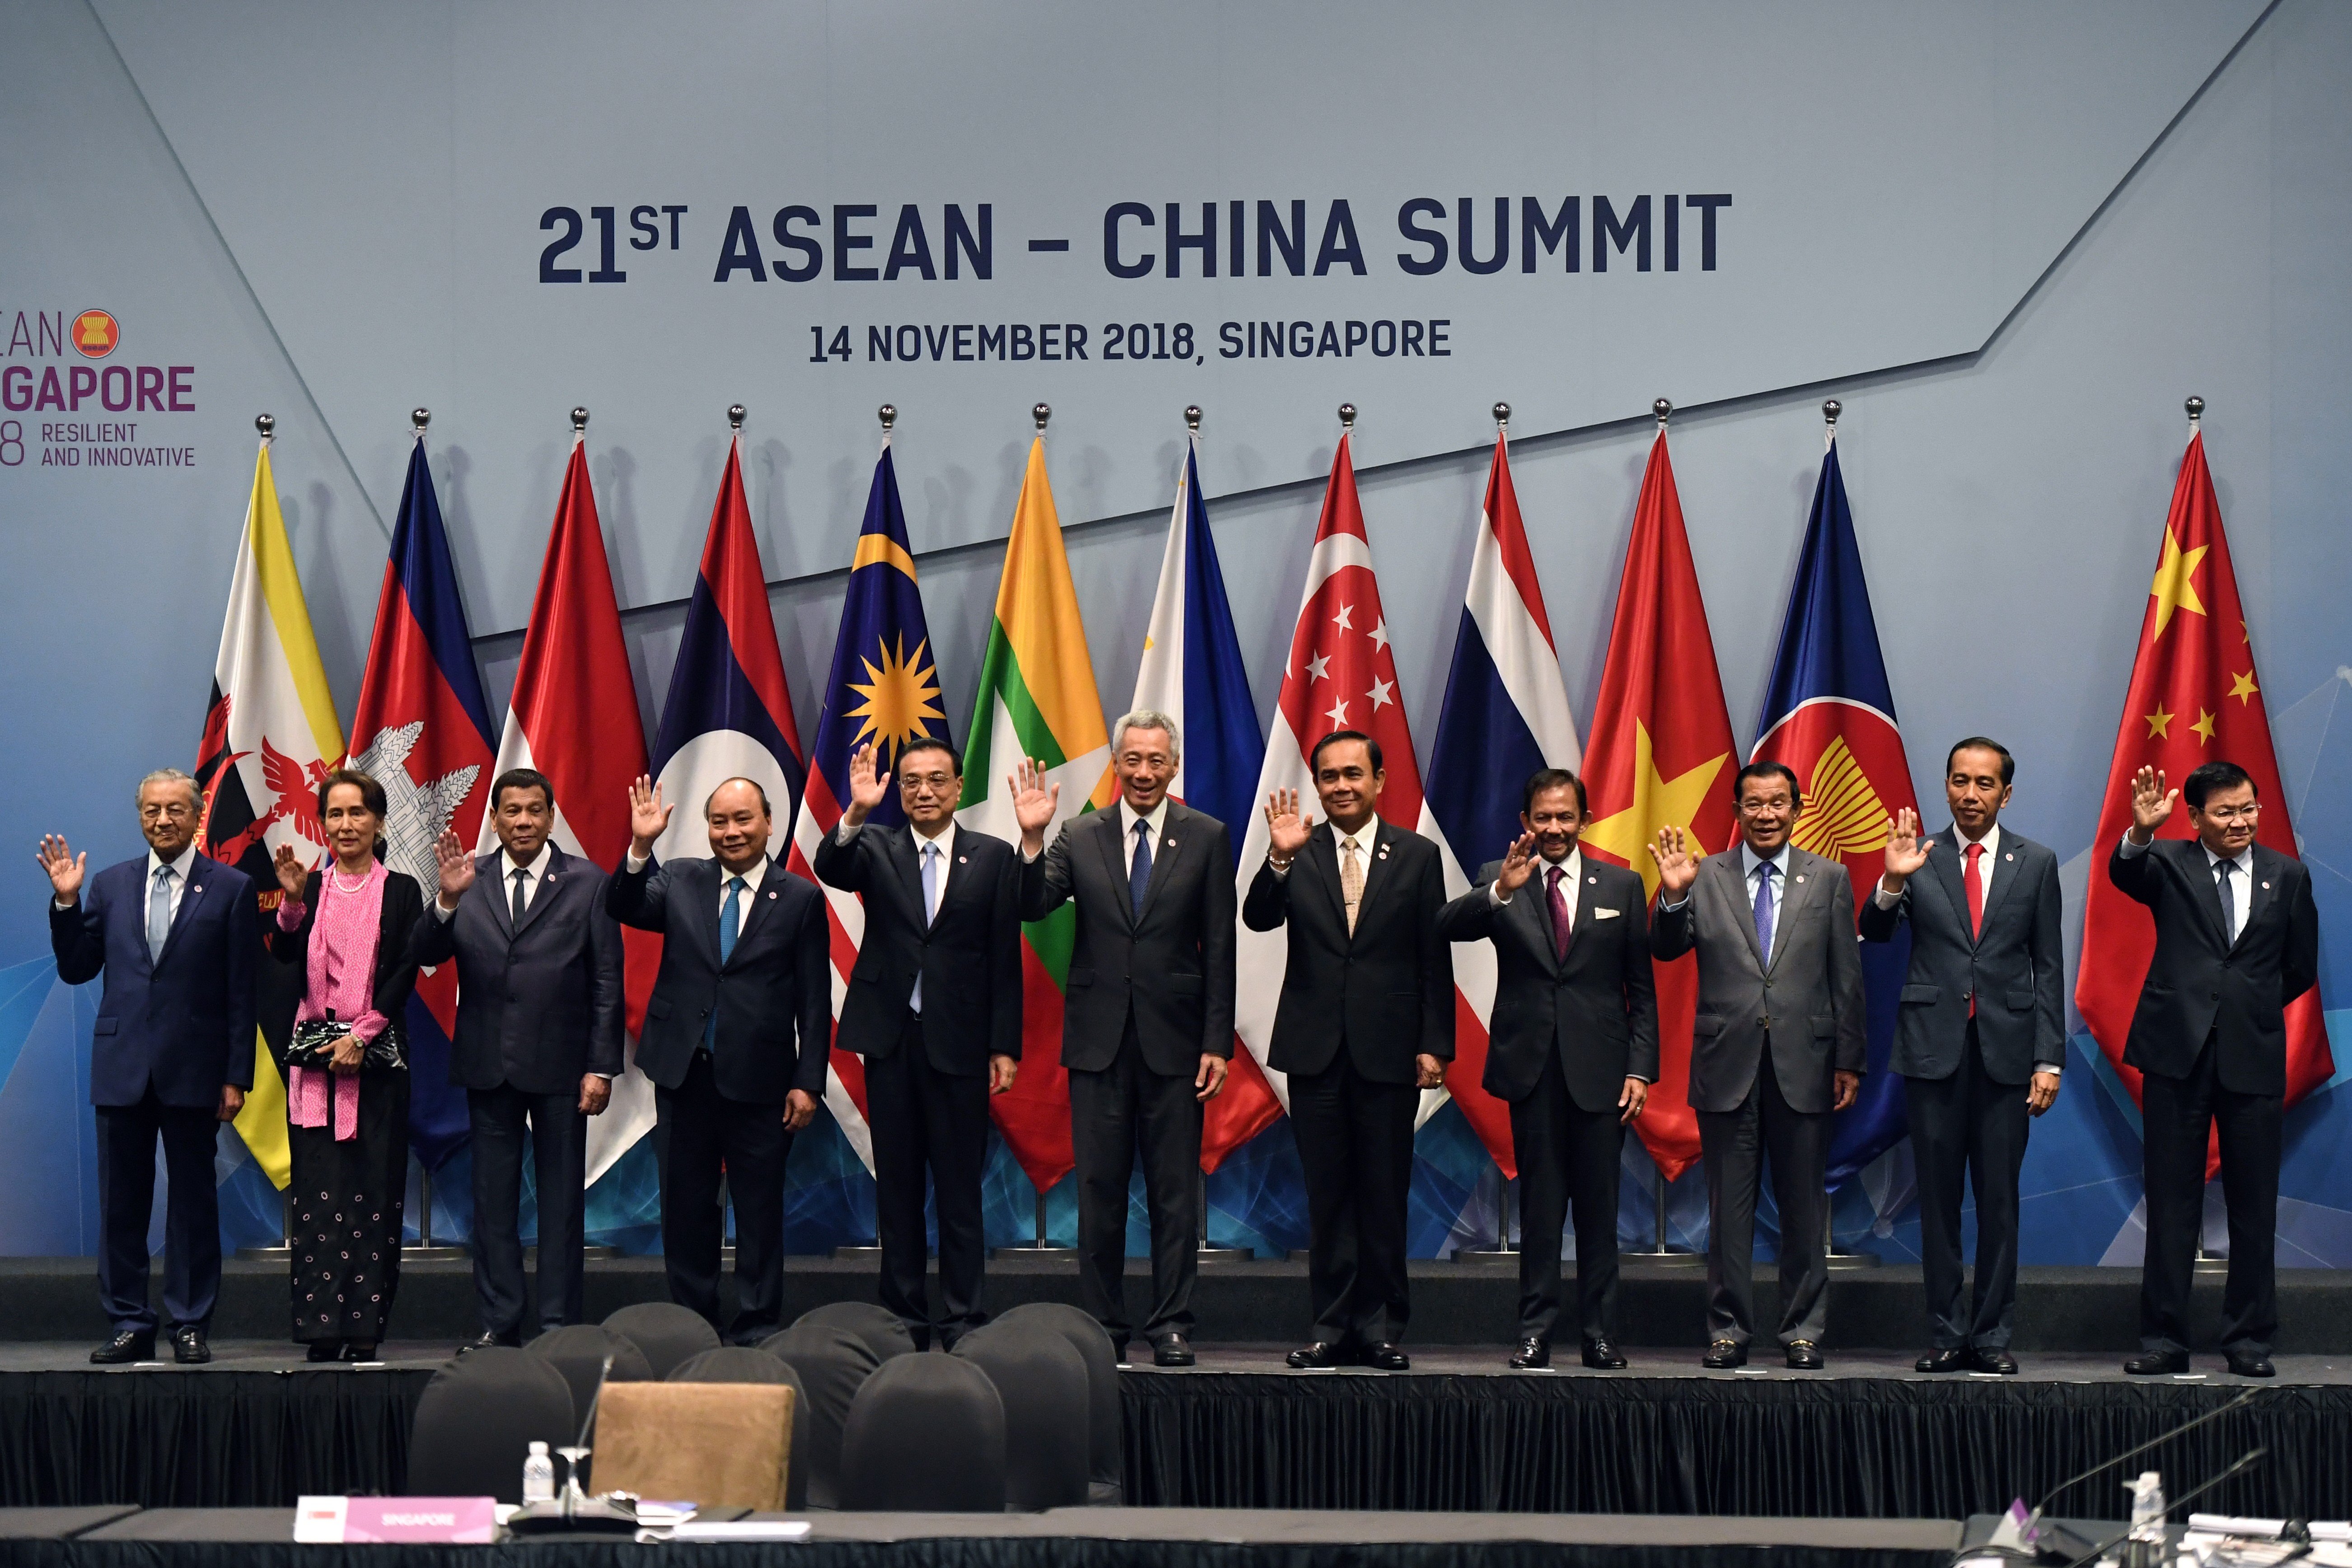 Asean member state leaders and Chinese Premier Li Keqiang (5th from left) before the start of the Asean-China summit on November 14, 2018. Photo: AFP